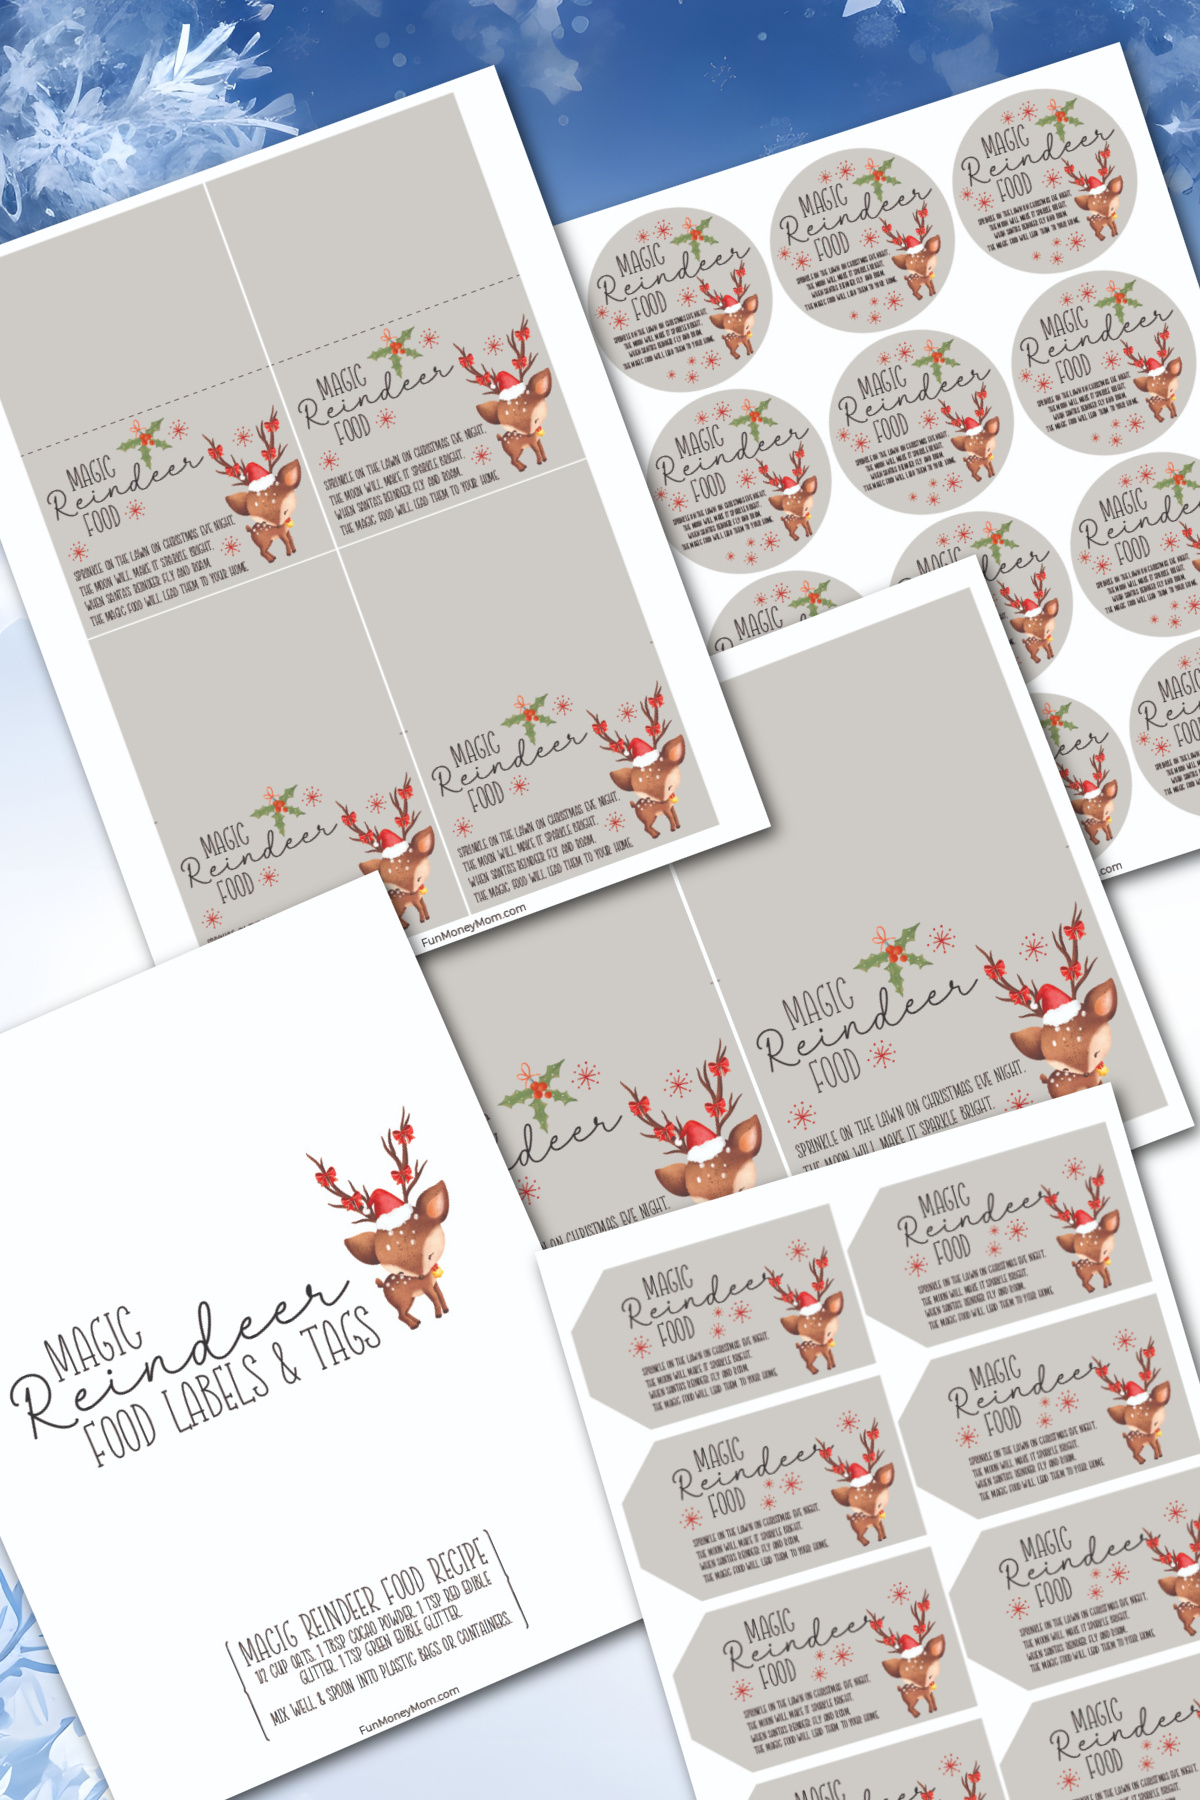 A set of christmas gift tags with reindeer on them.